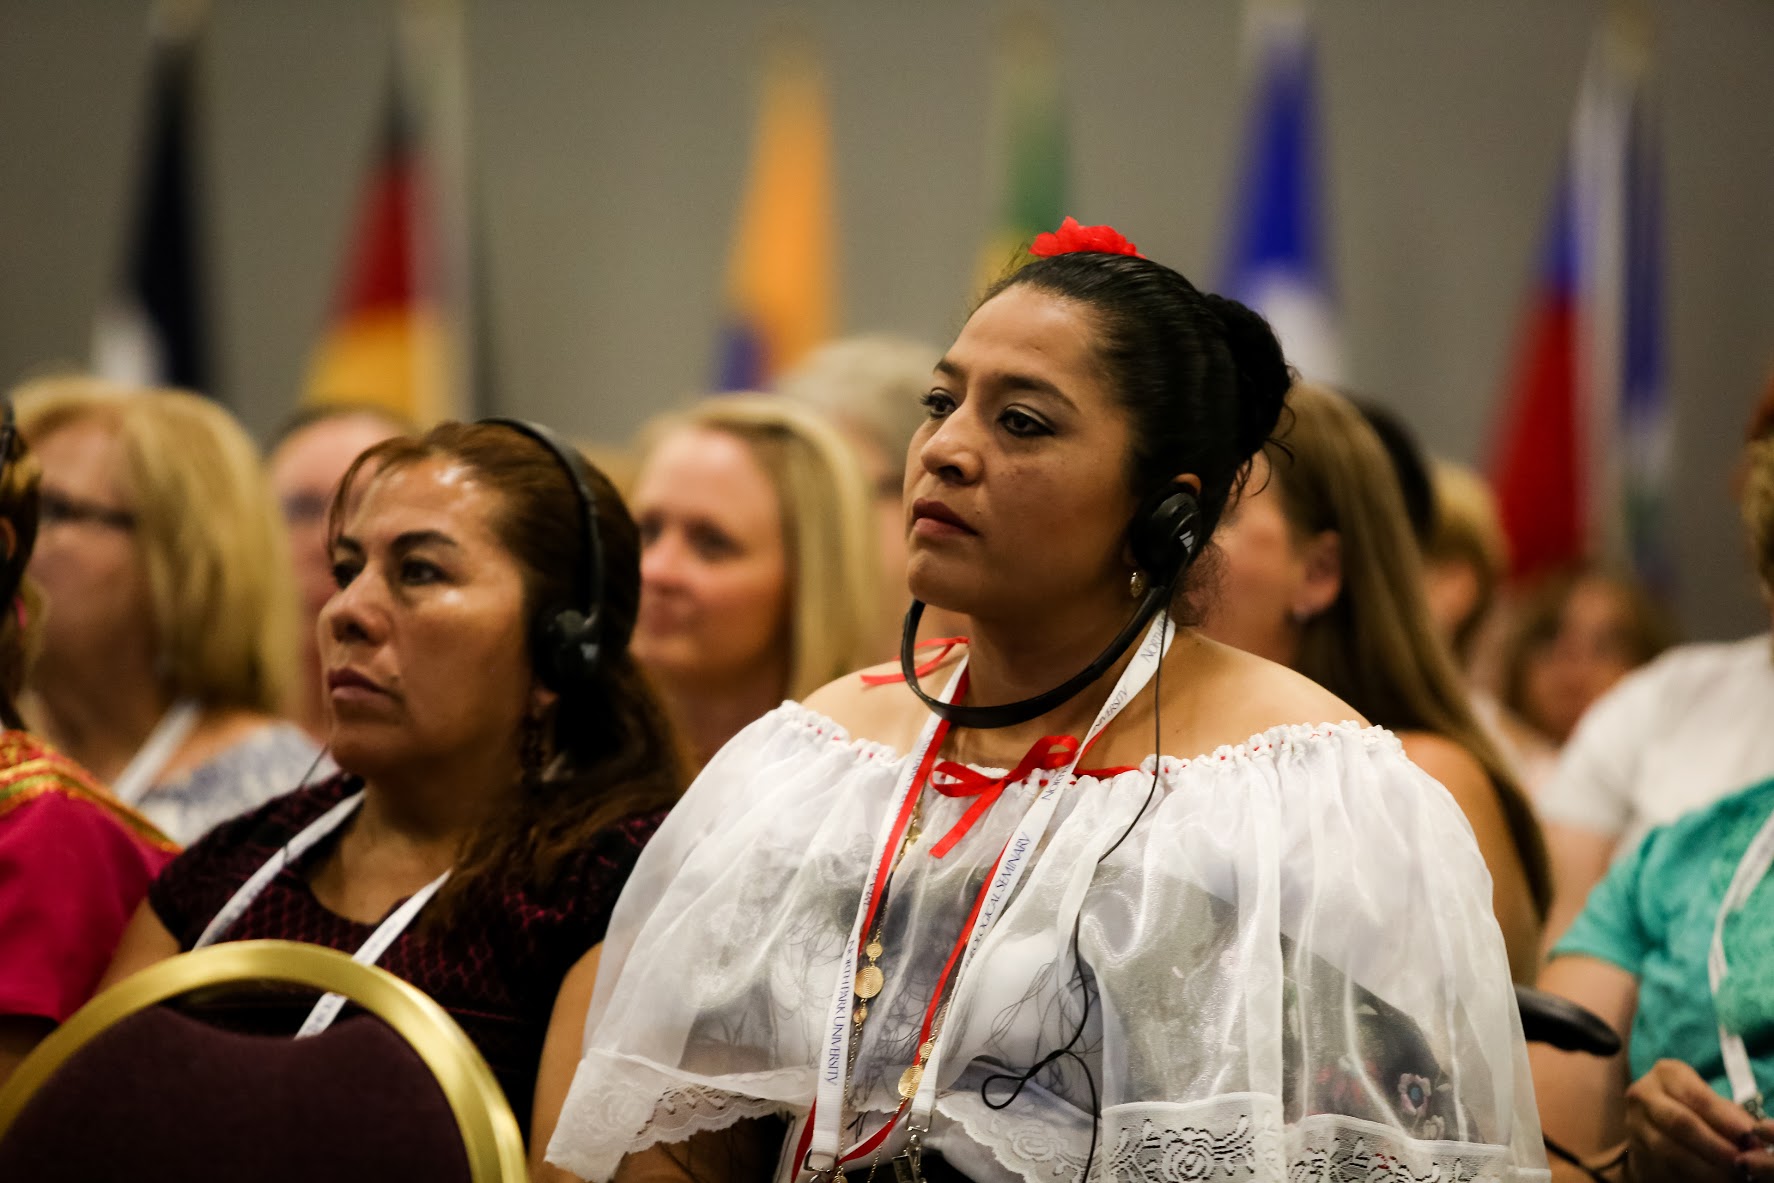 Women from around the world are attending Triennial XV, and the services are translated into their native languages.